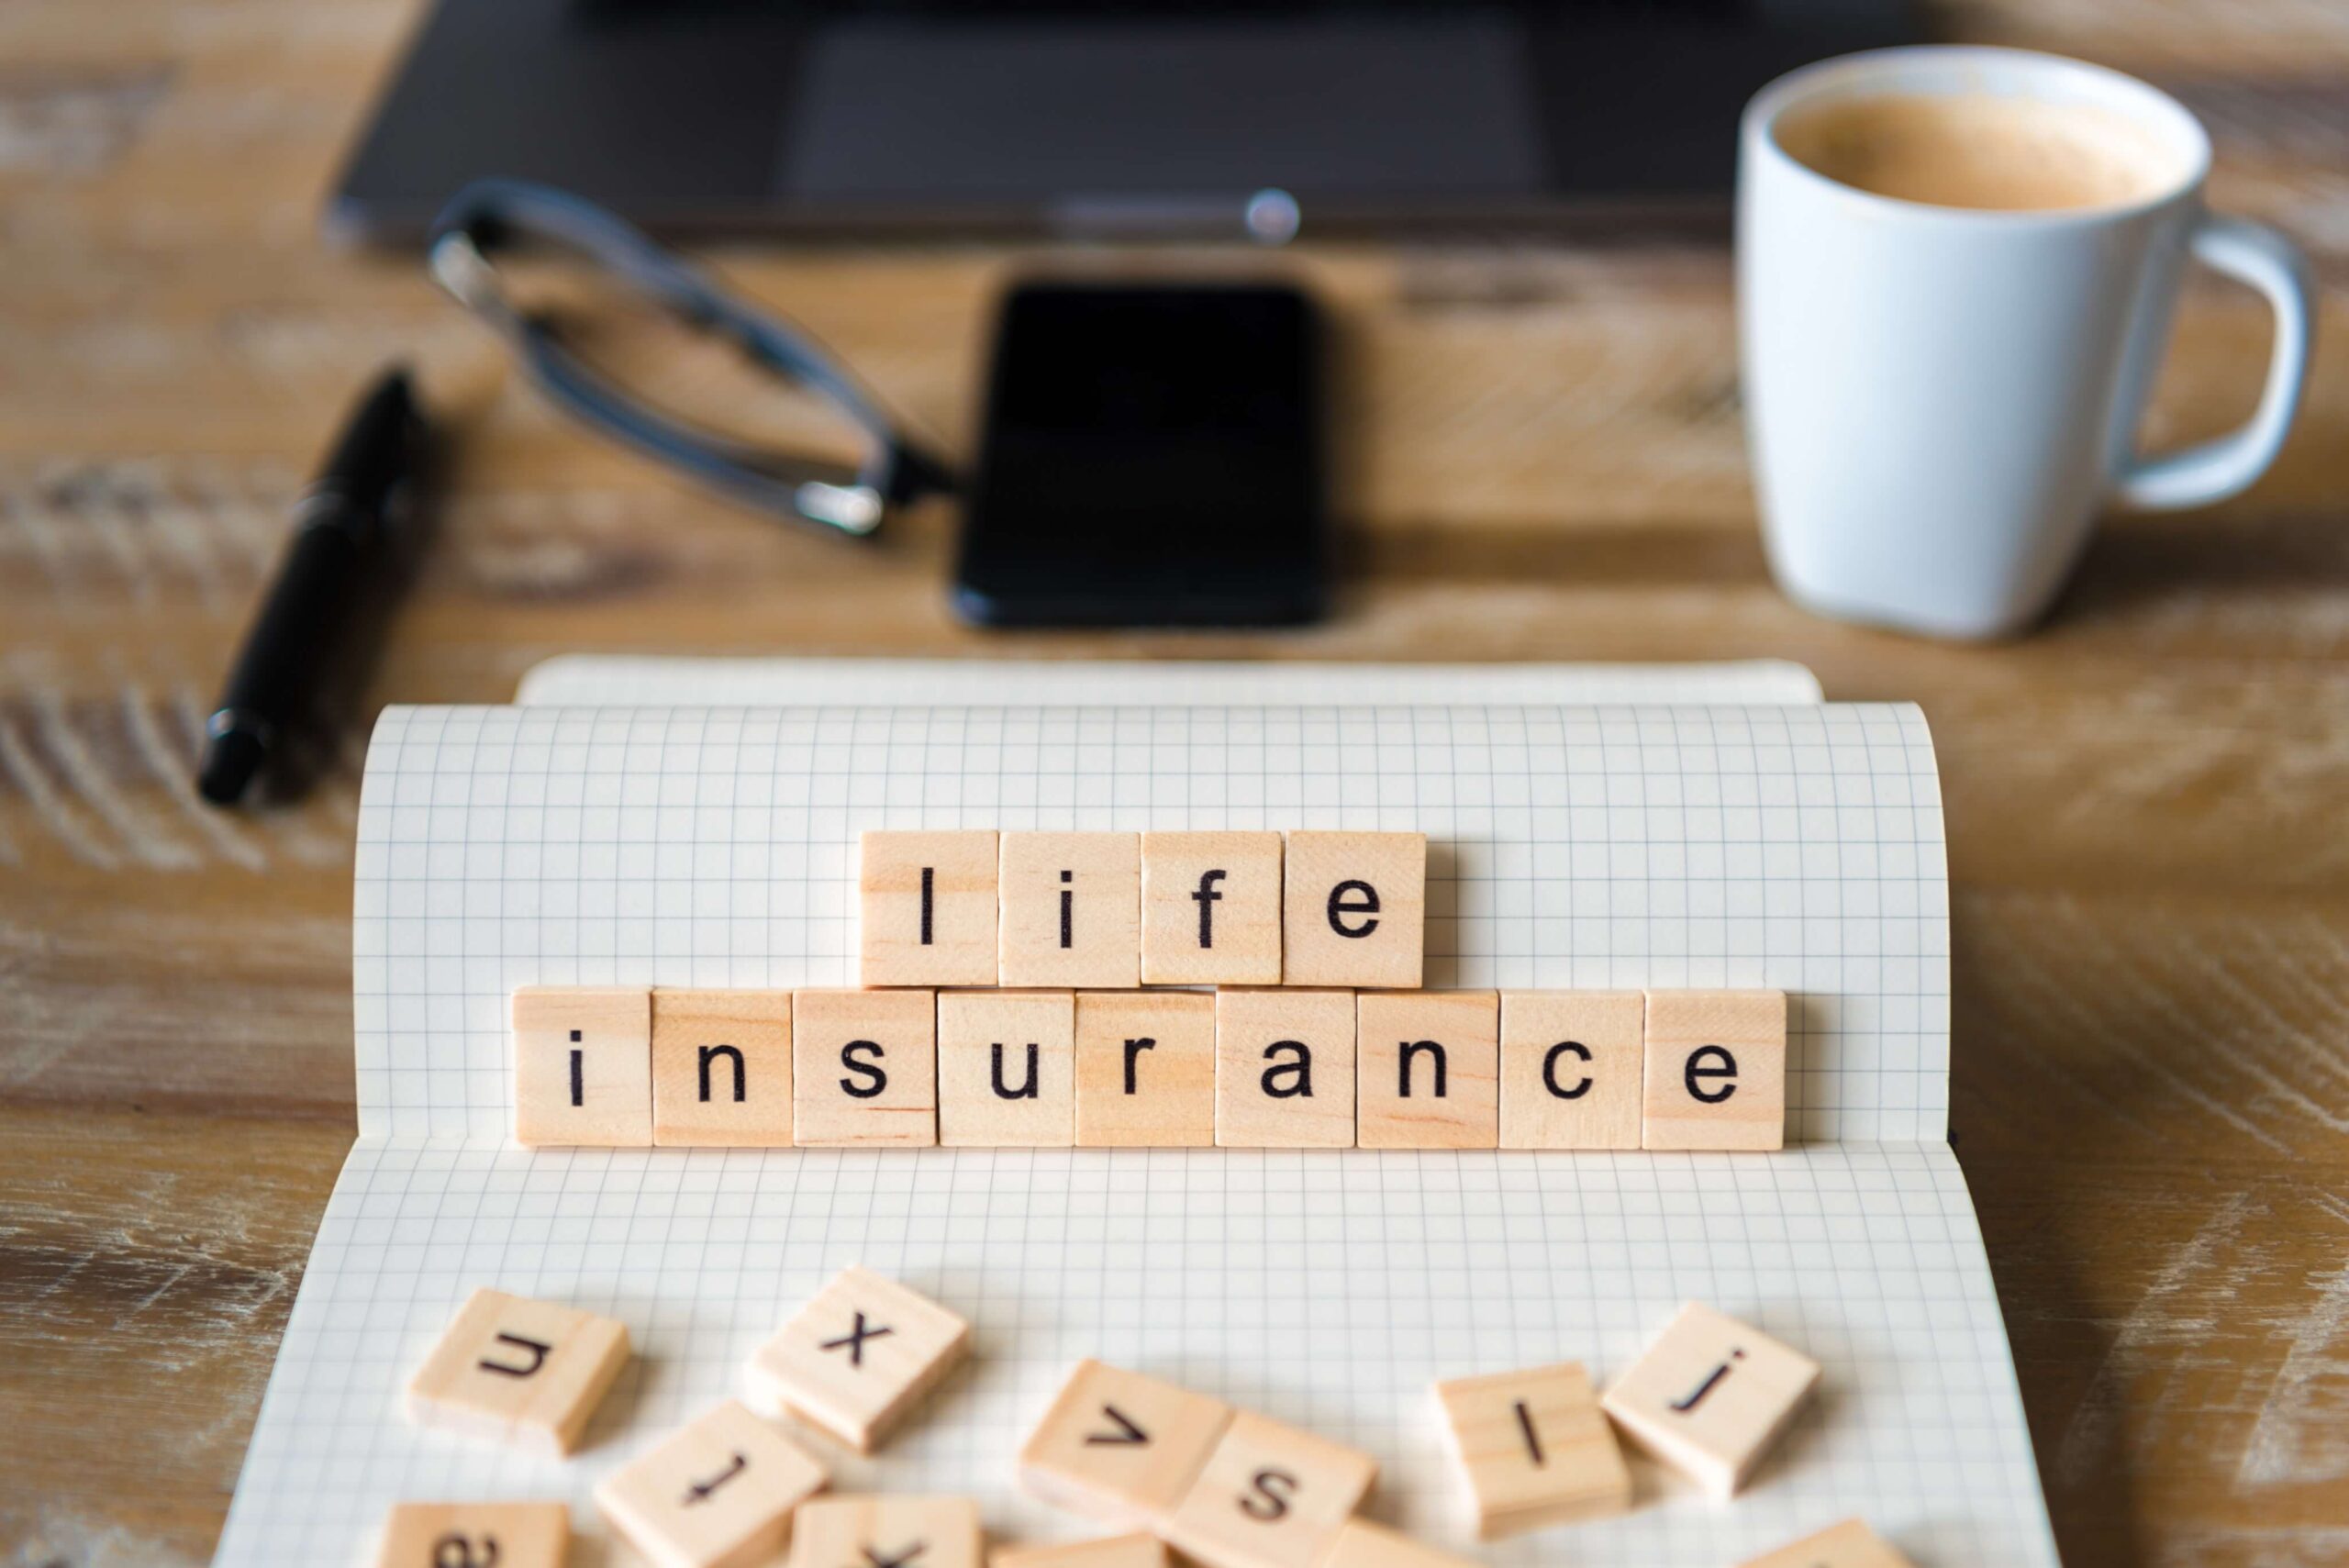 Working from Anywhere How Remote Life Insurance Jobs Can Secure Your Future